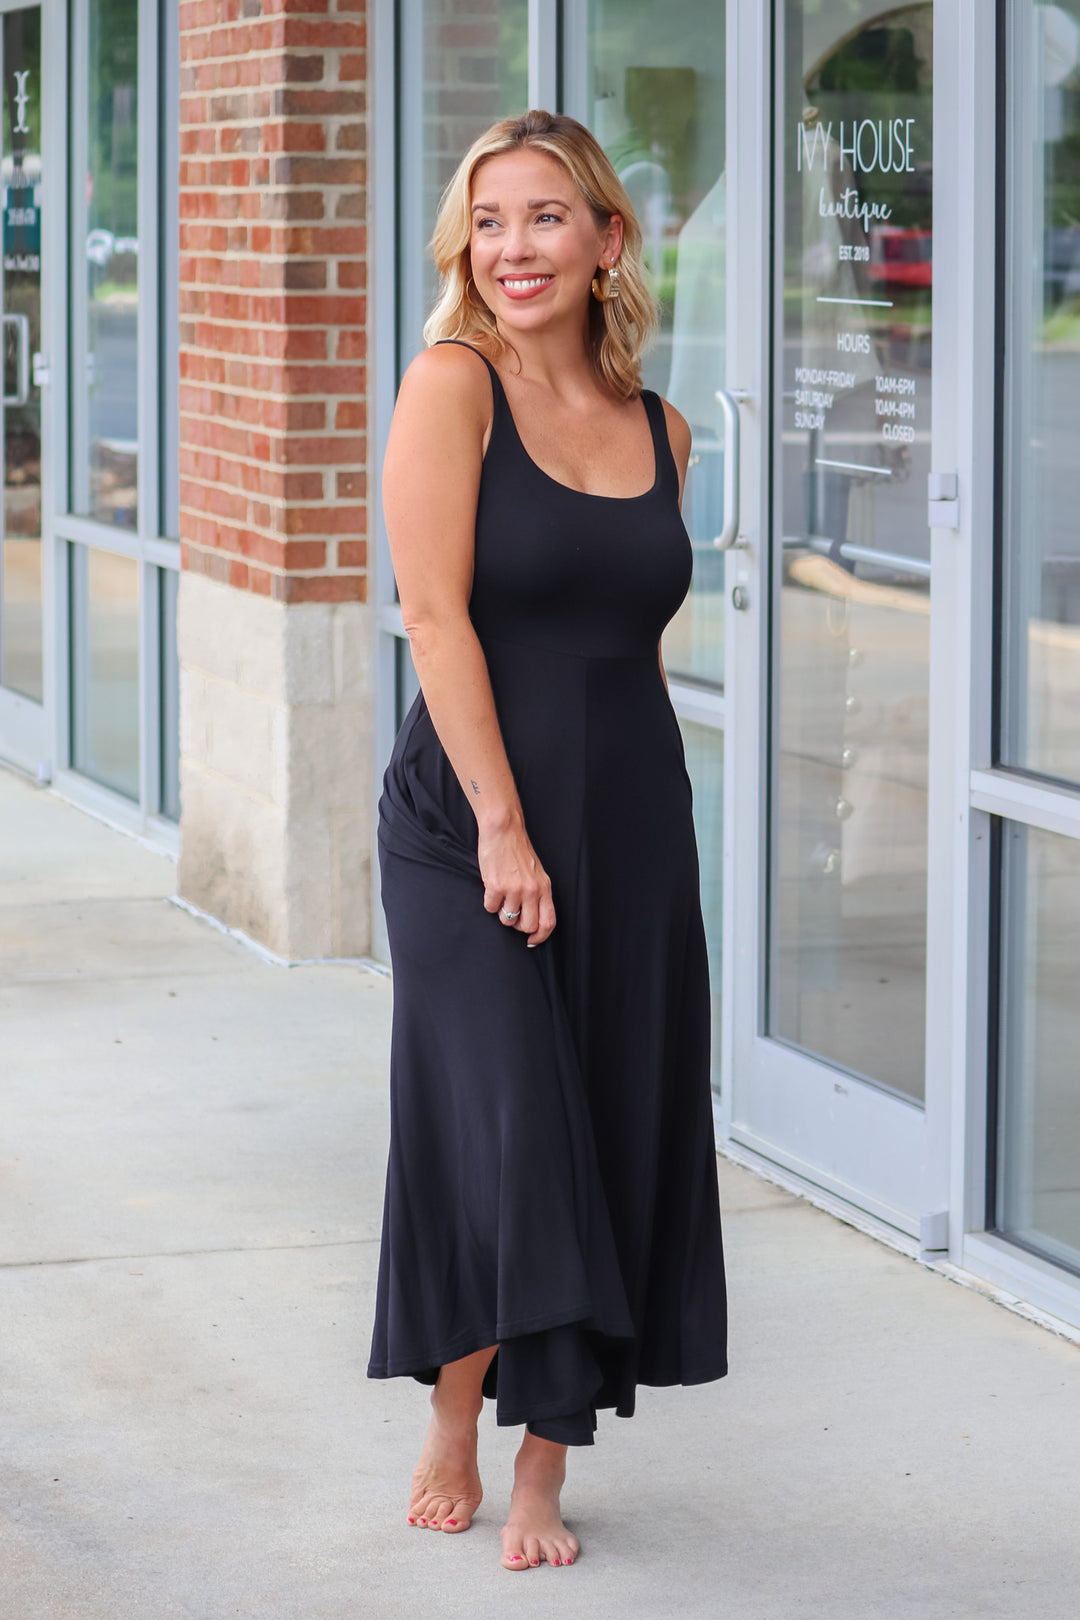 A blonde woman wearing a black maxi dress with a square neckline and pockets. She is standing in front of a shop.